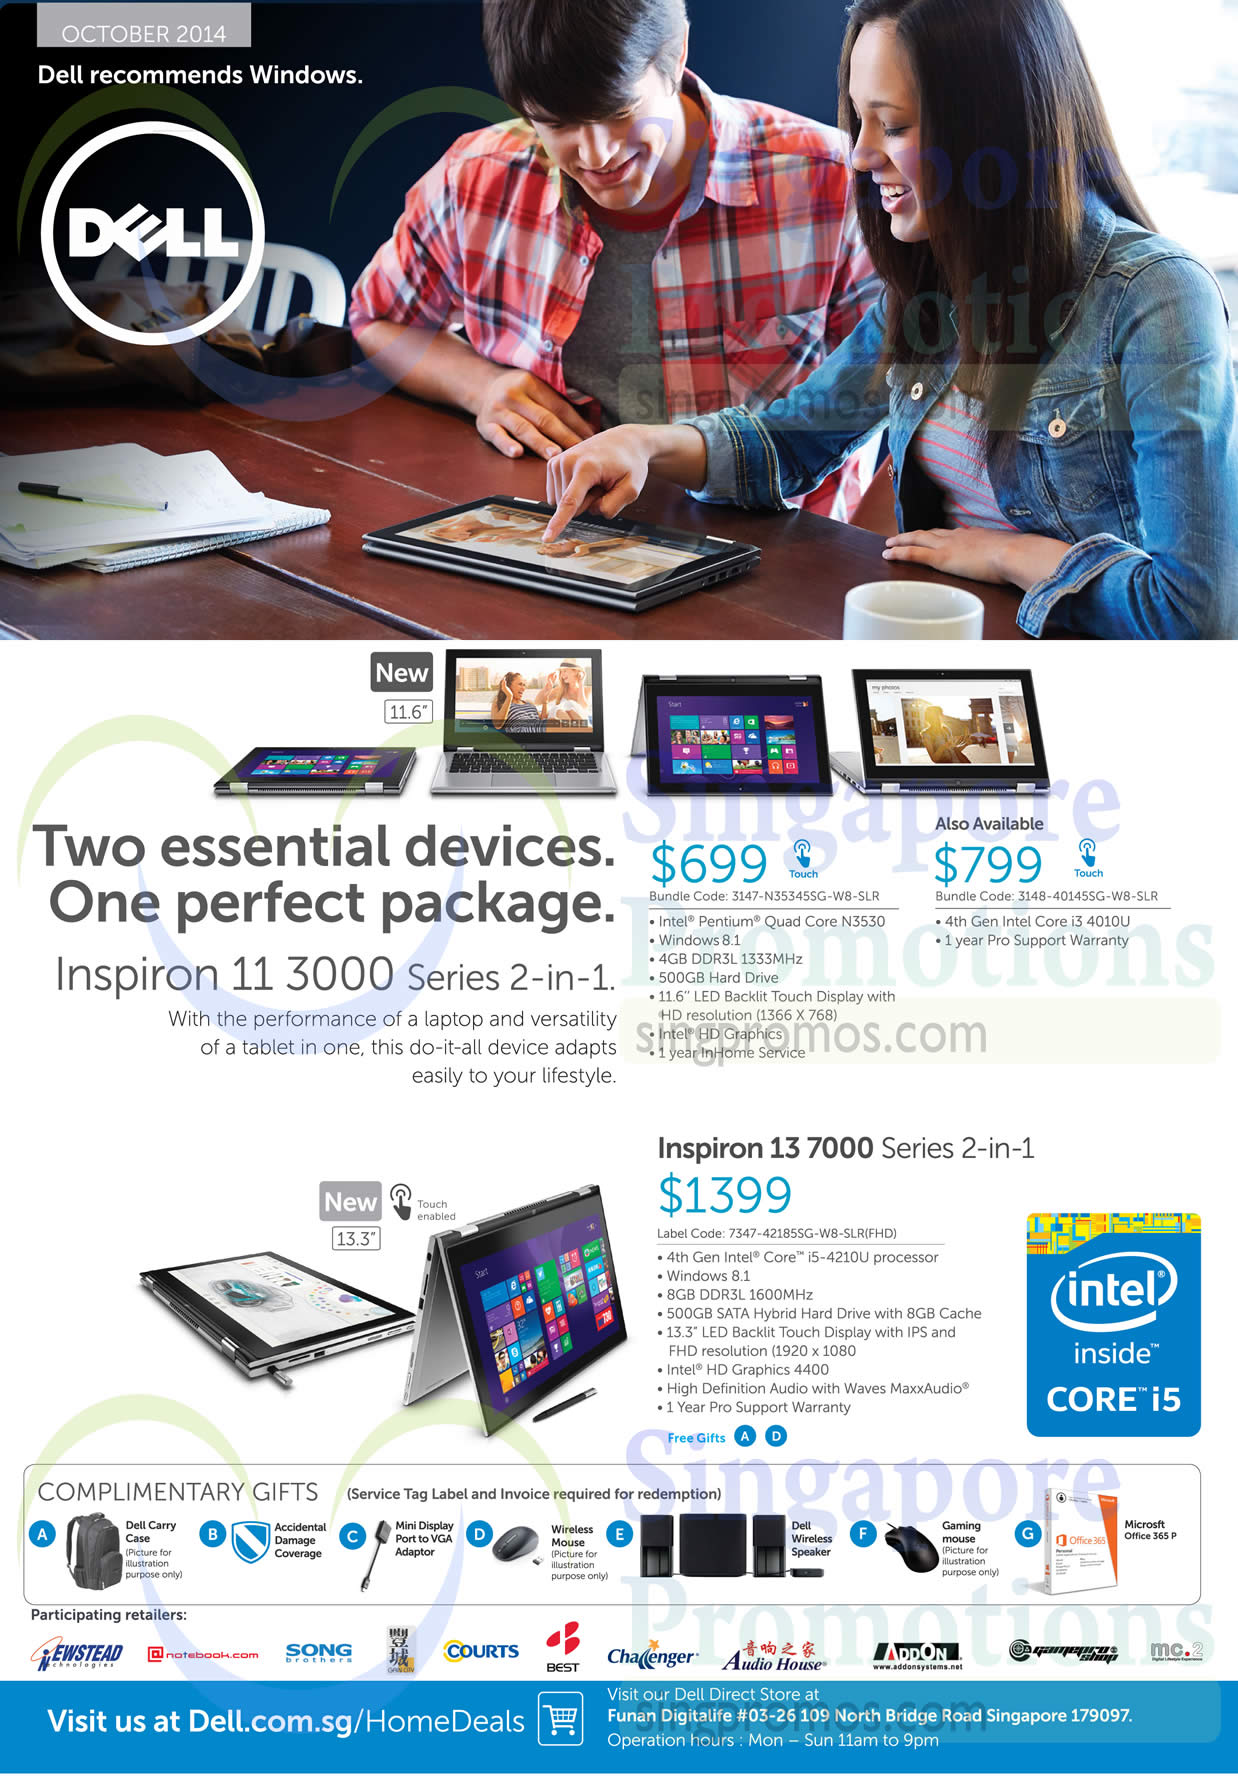 Featured image for Dell Notebooks, Desktop PCs & Monitors Offers 1 - 31 Oct 2014